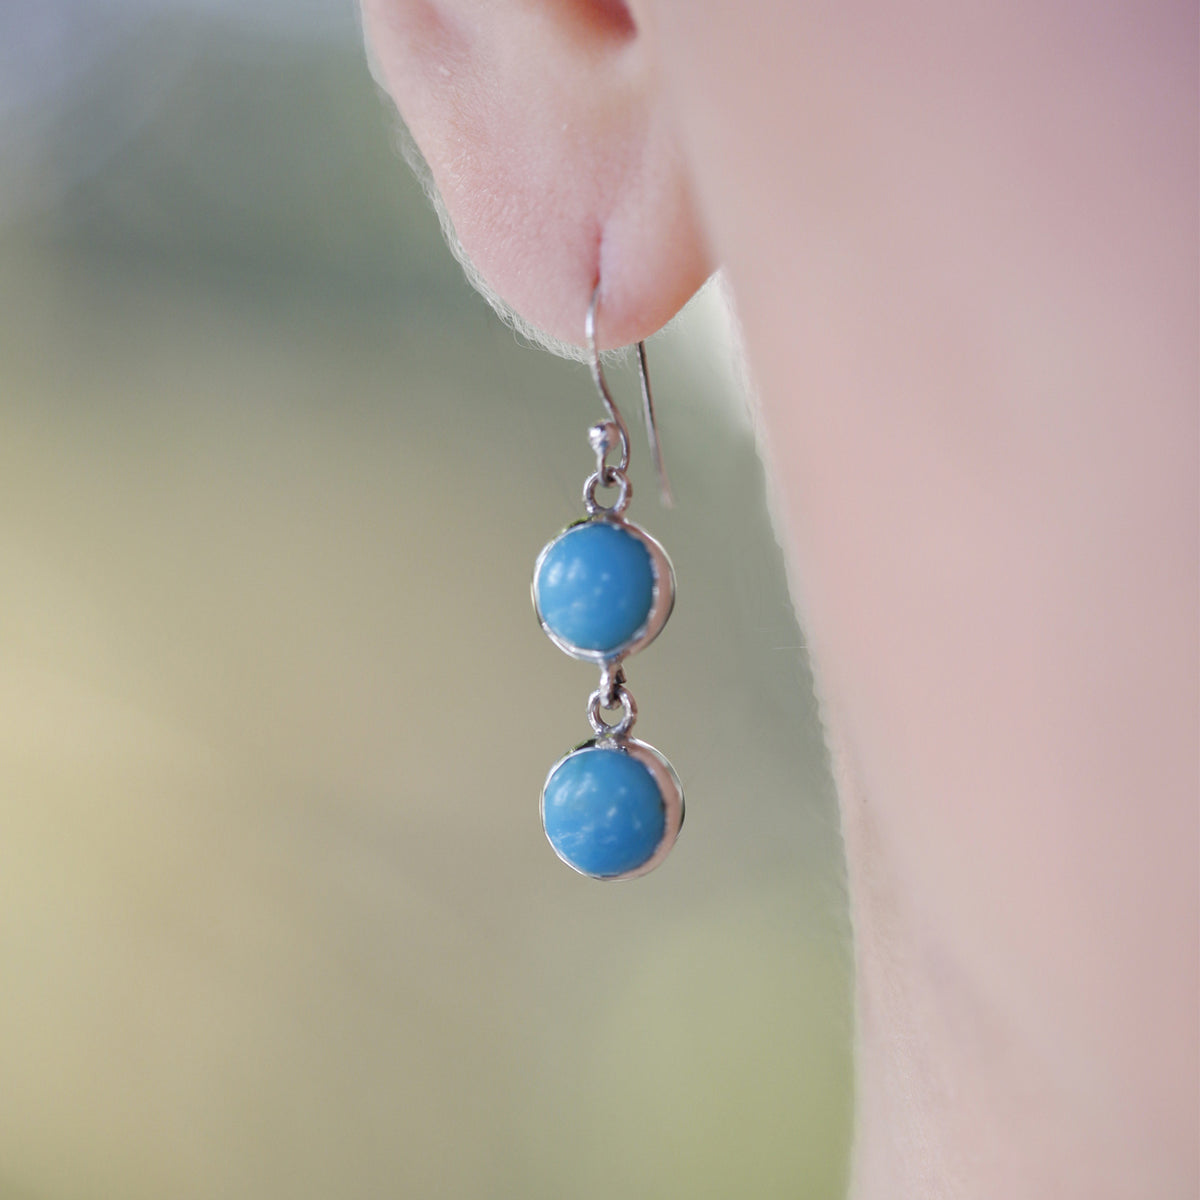 Round turquoise hanging earrings